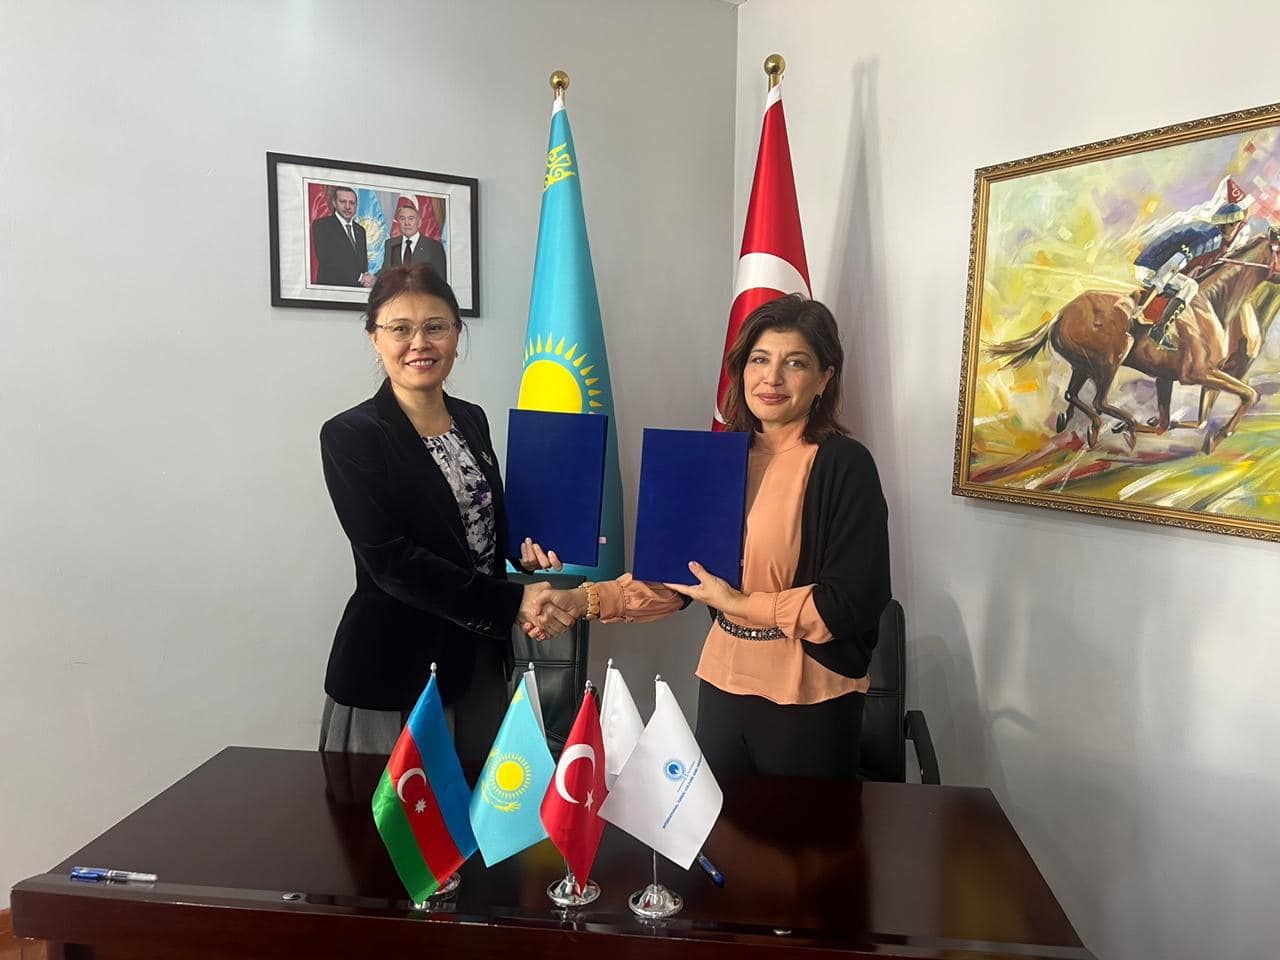 Int'l Turkic Culture & Heritage Foundation signs MoU with Kazakh university [PHOTOS]